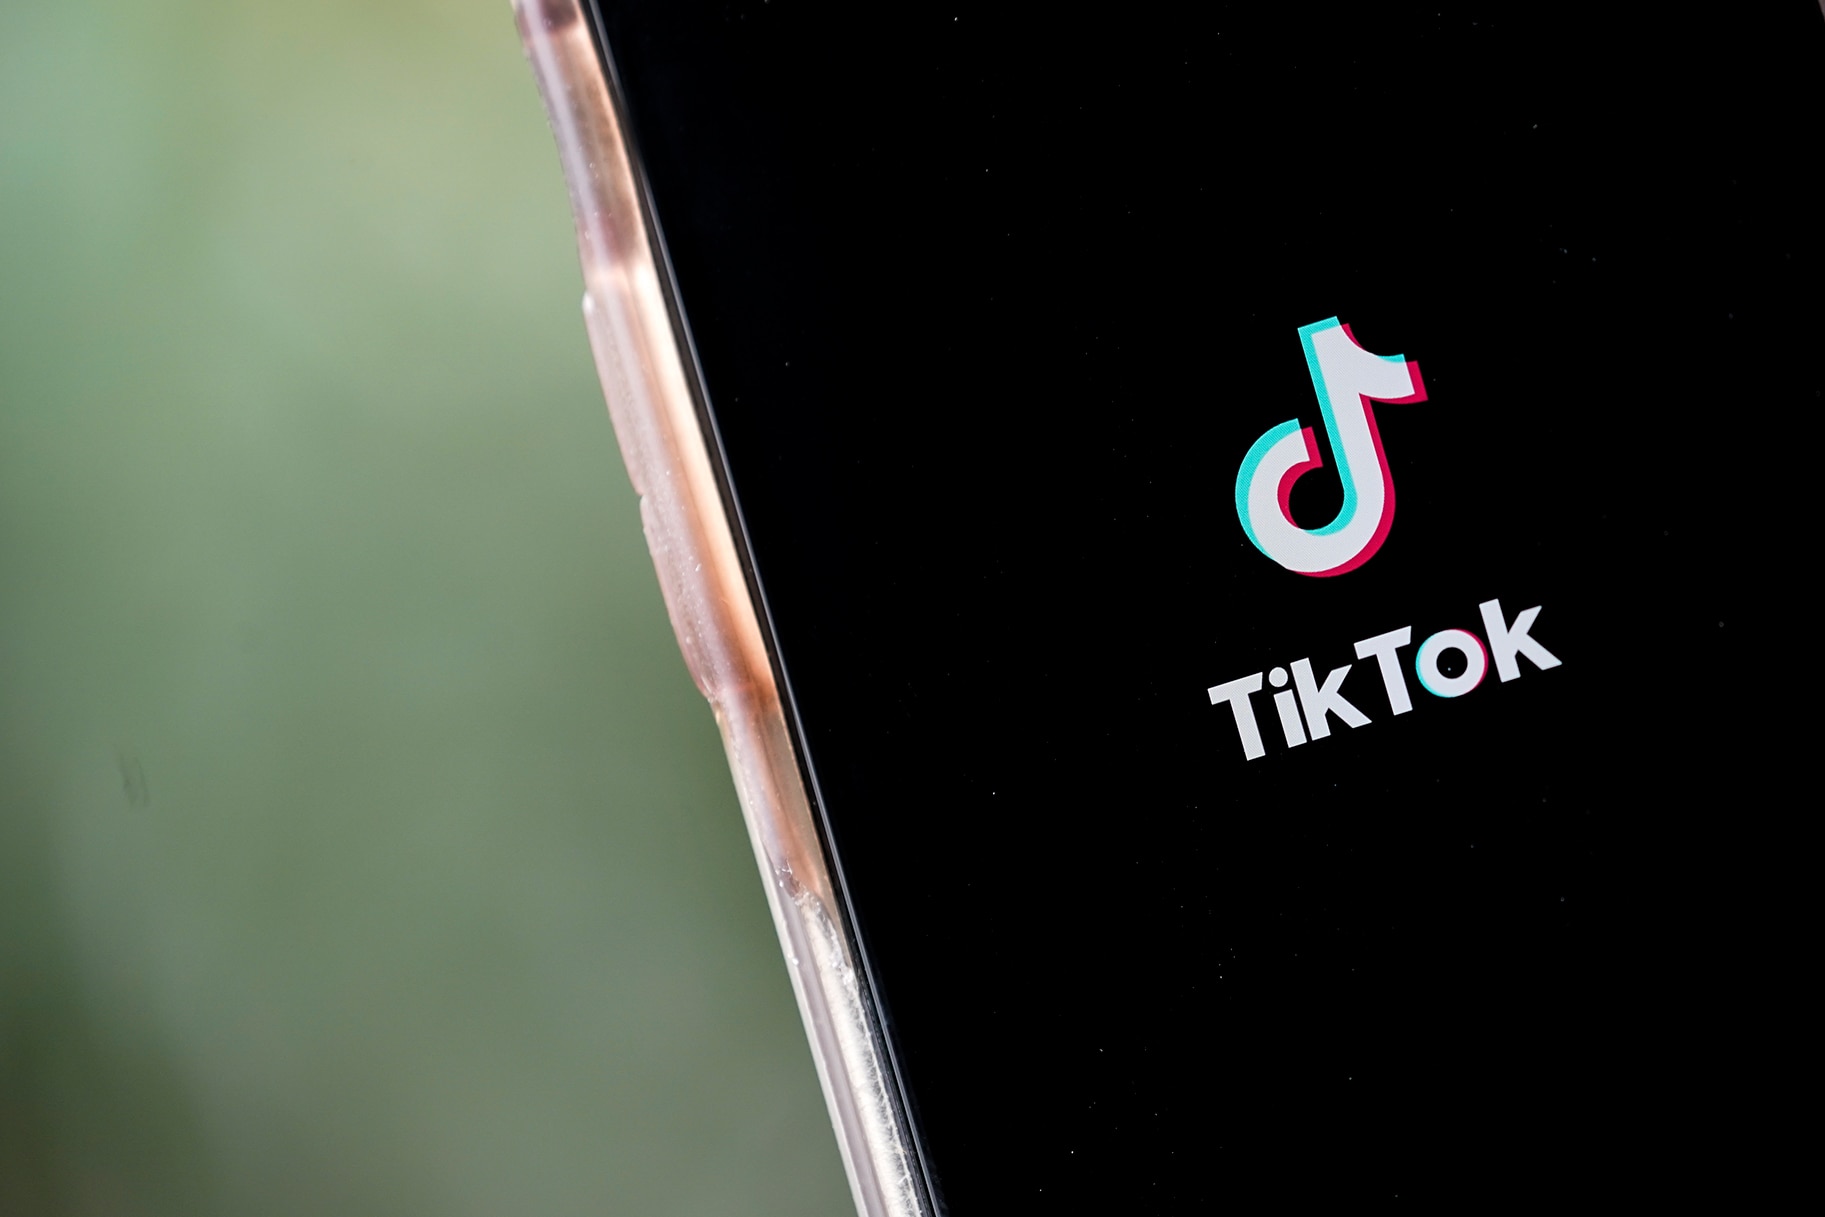 The app Tiktok opened up on a phone